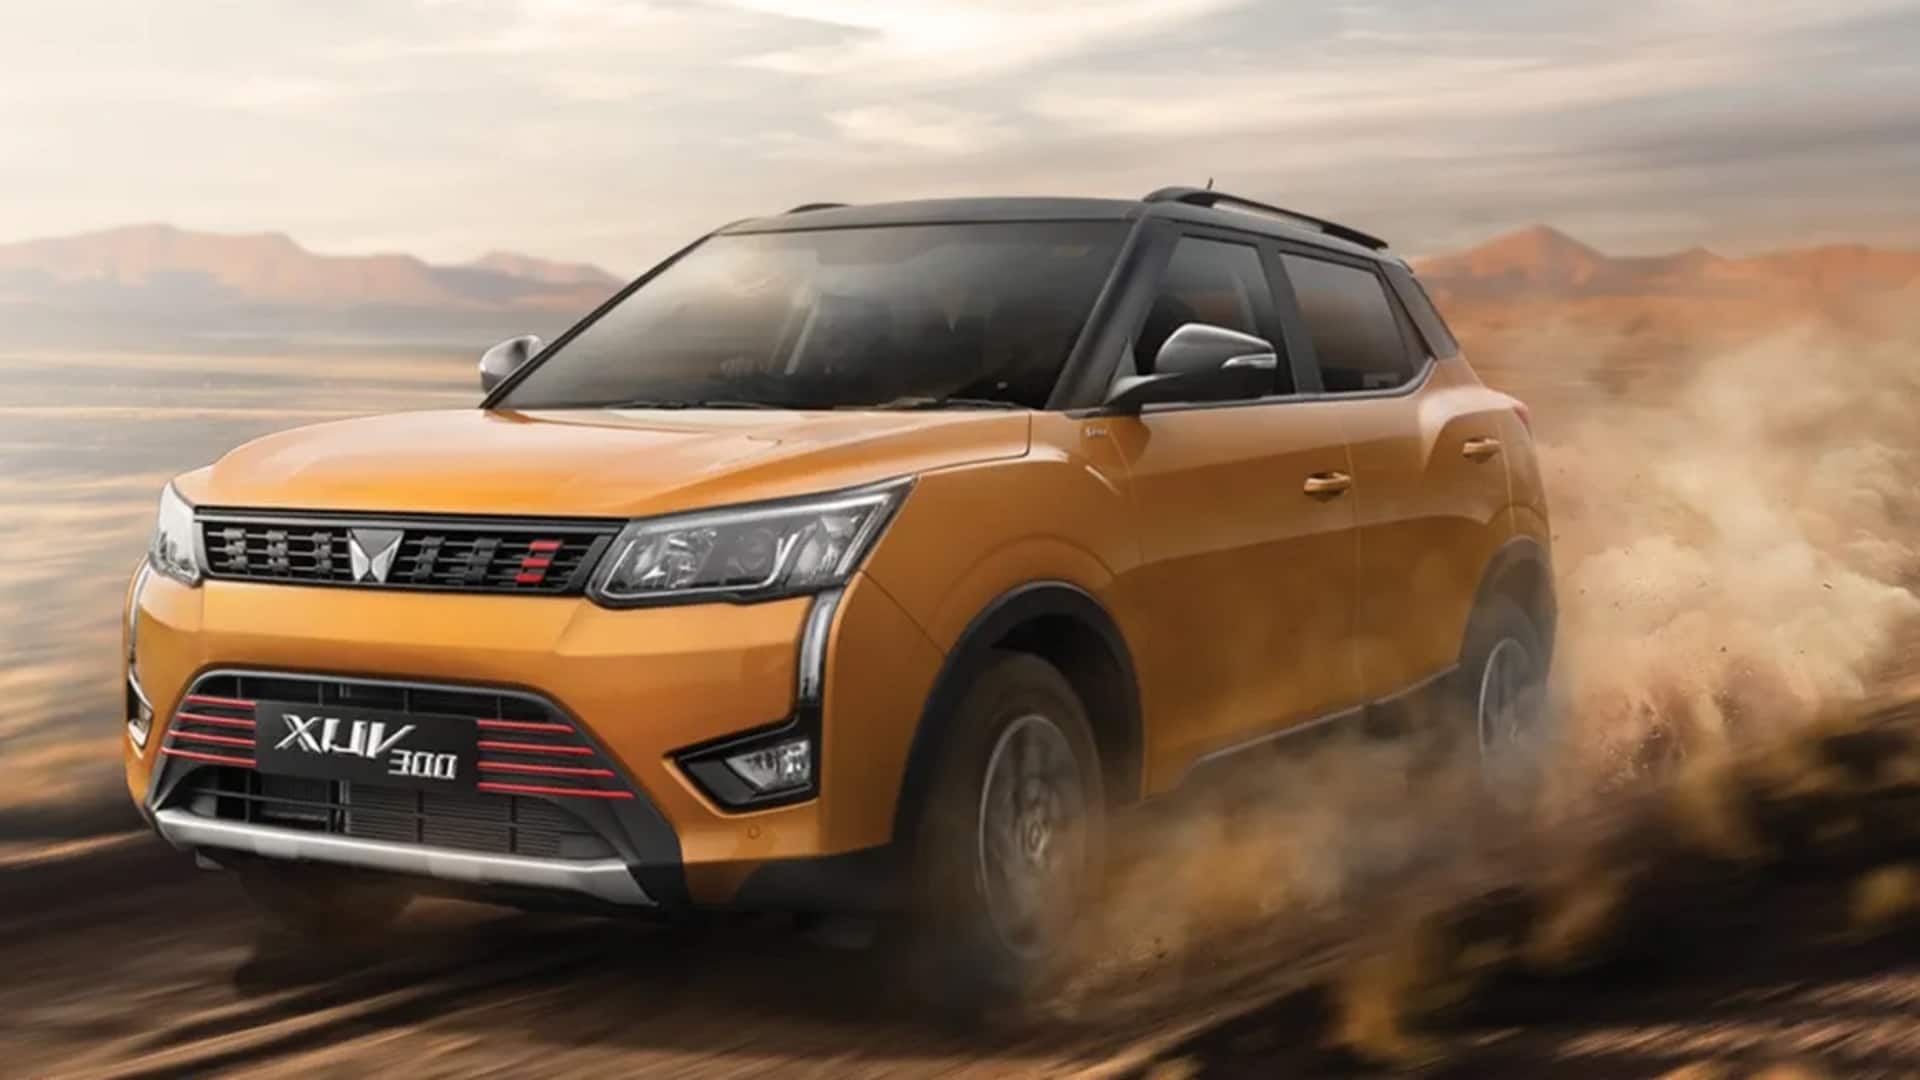 Nexon-rivaling Mahindra XUV300 (facelift) imagined before launch: What to expect